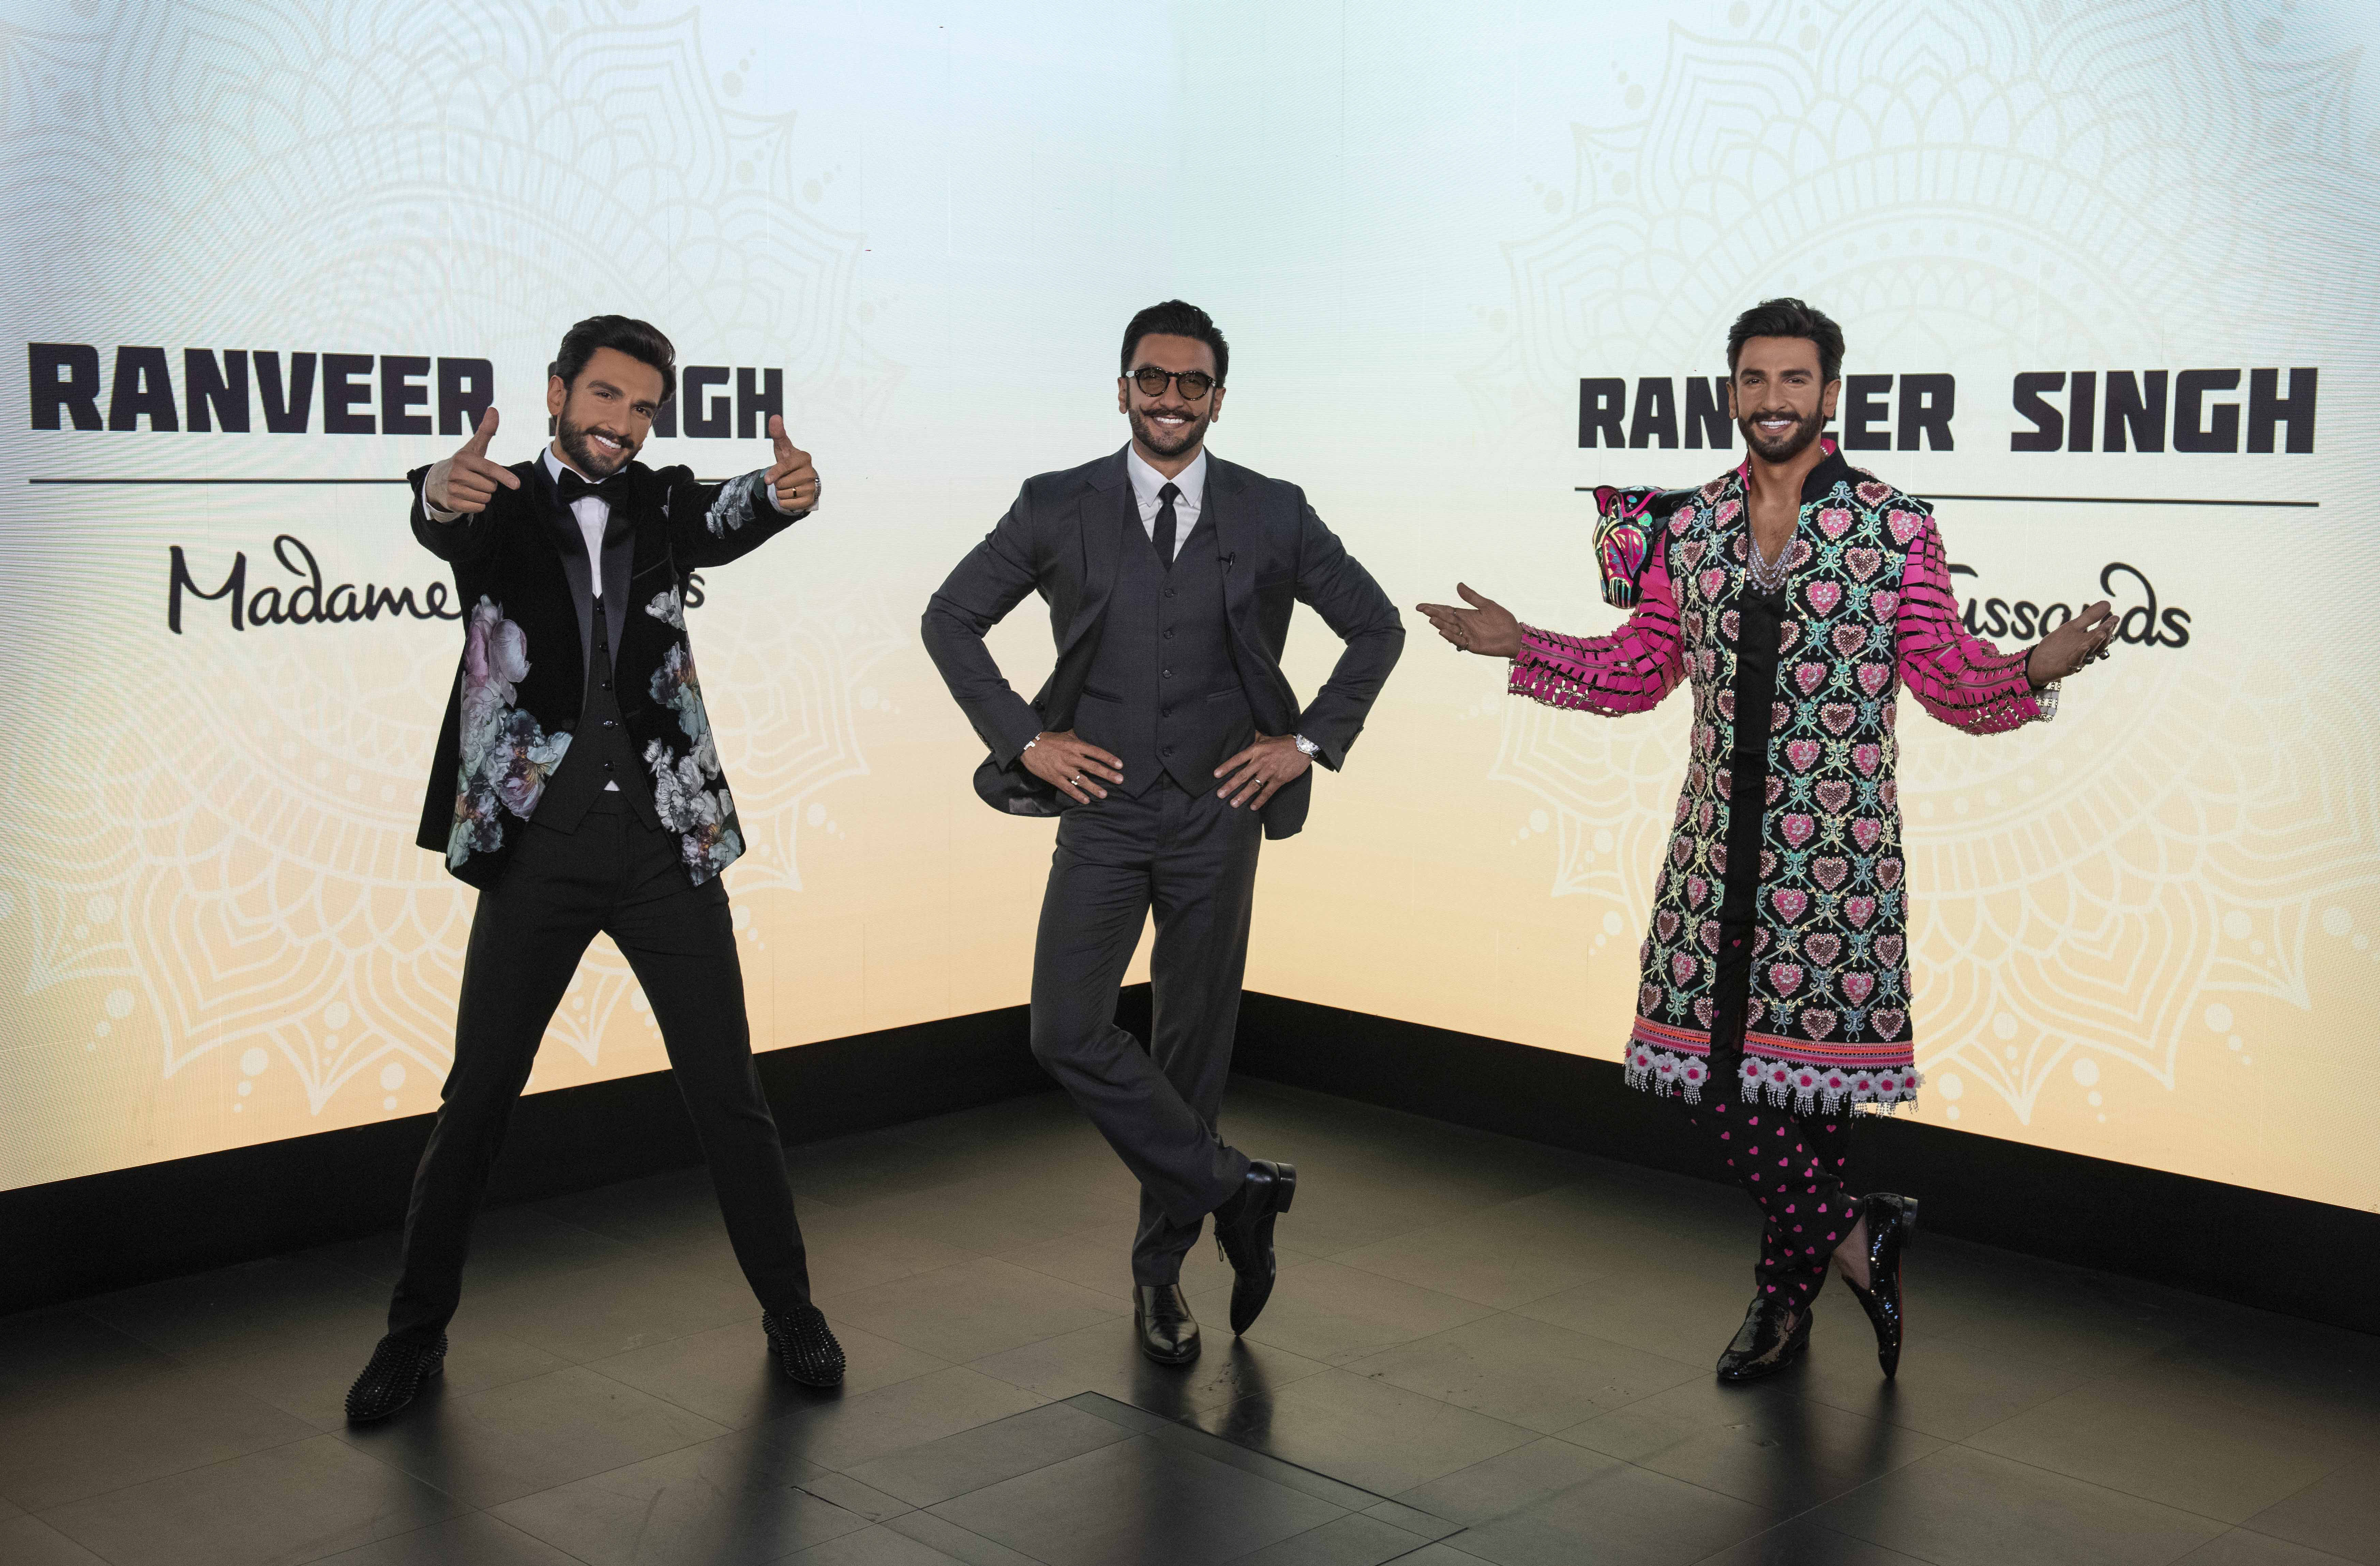 Madame Tussauds features two replicas of Ranveer Singh while the Bollywood actor visited his wax statues, posing with his arms on his hips in the middle of the two figures, creating a challenge to discern the real from the wax.